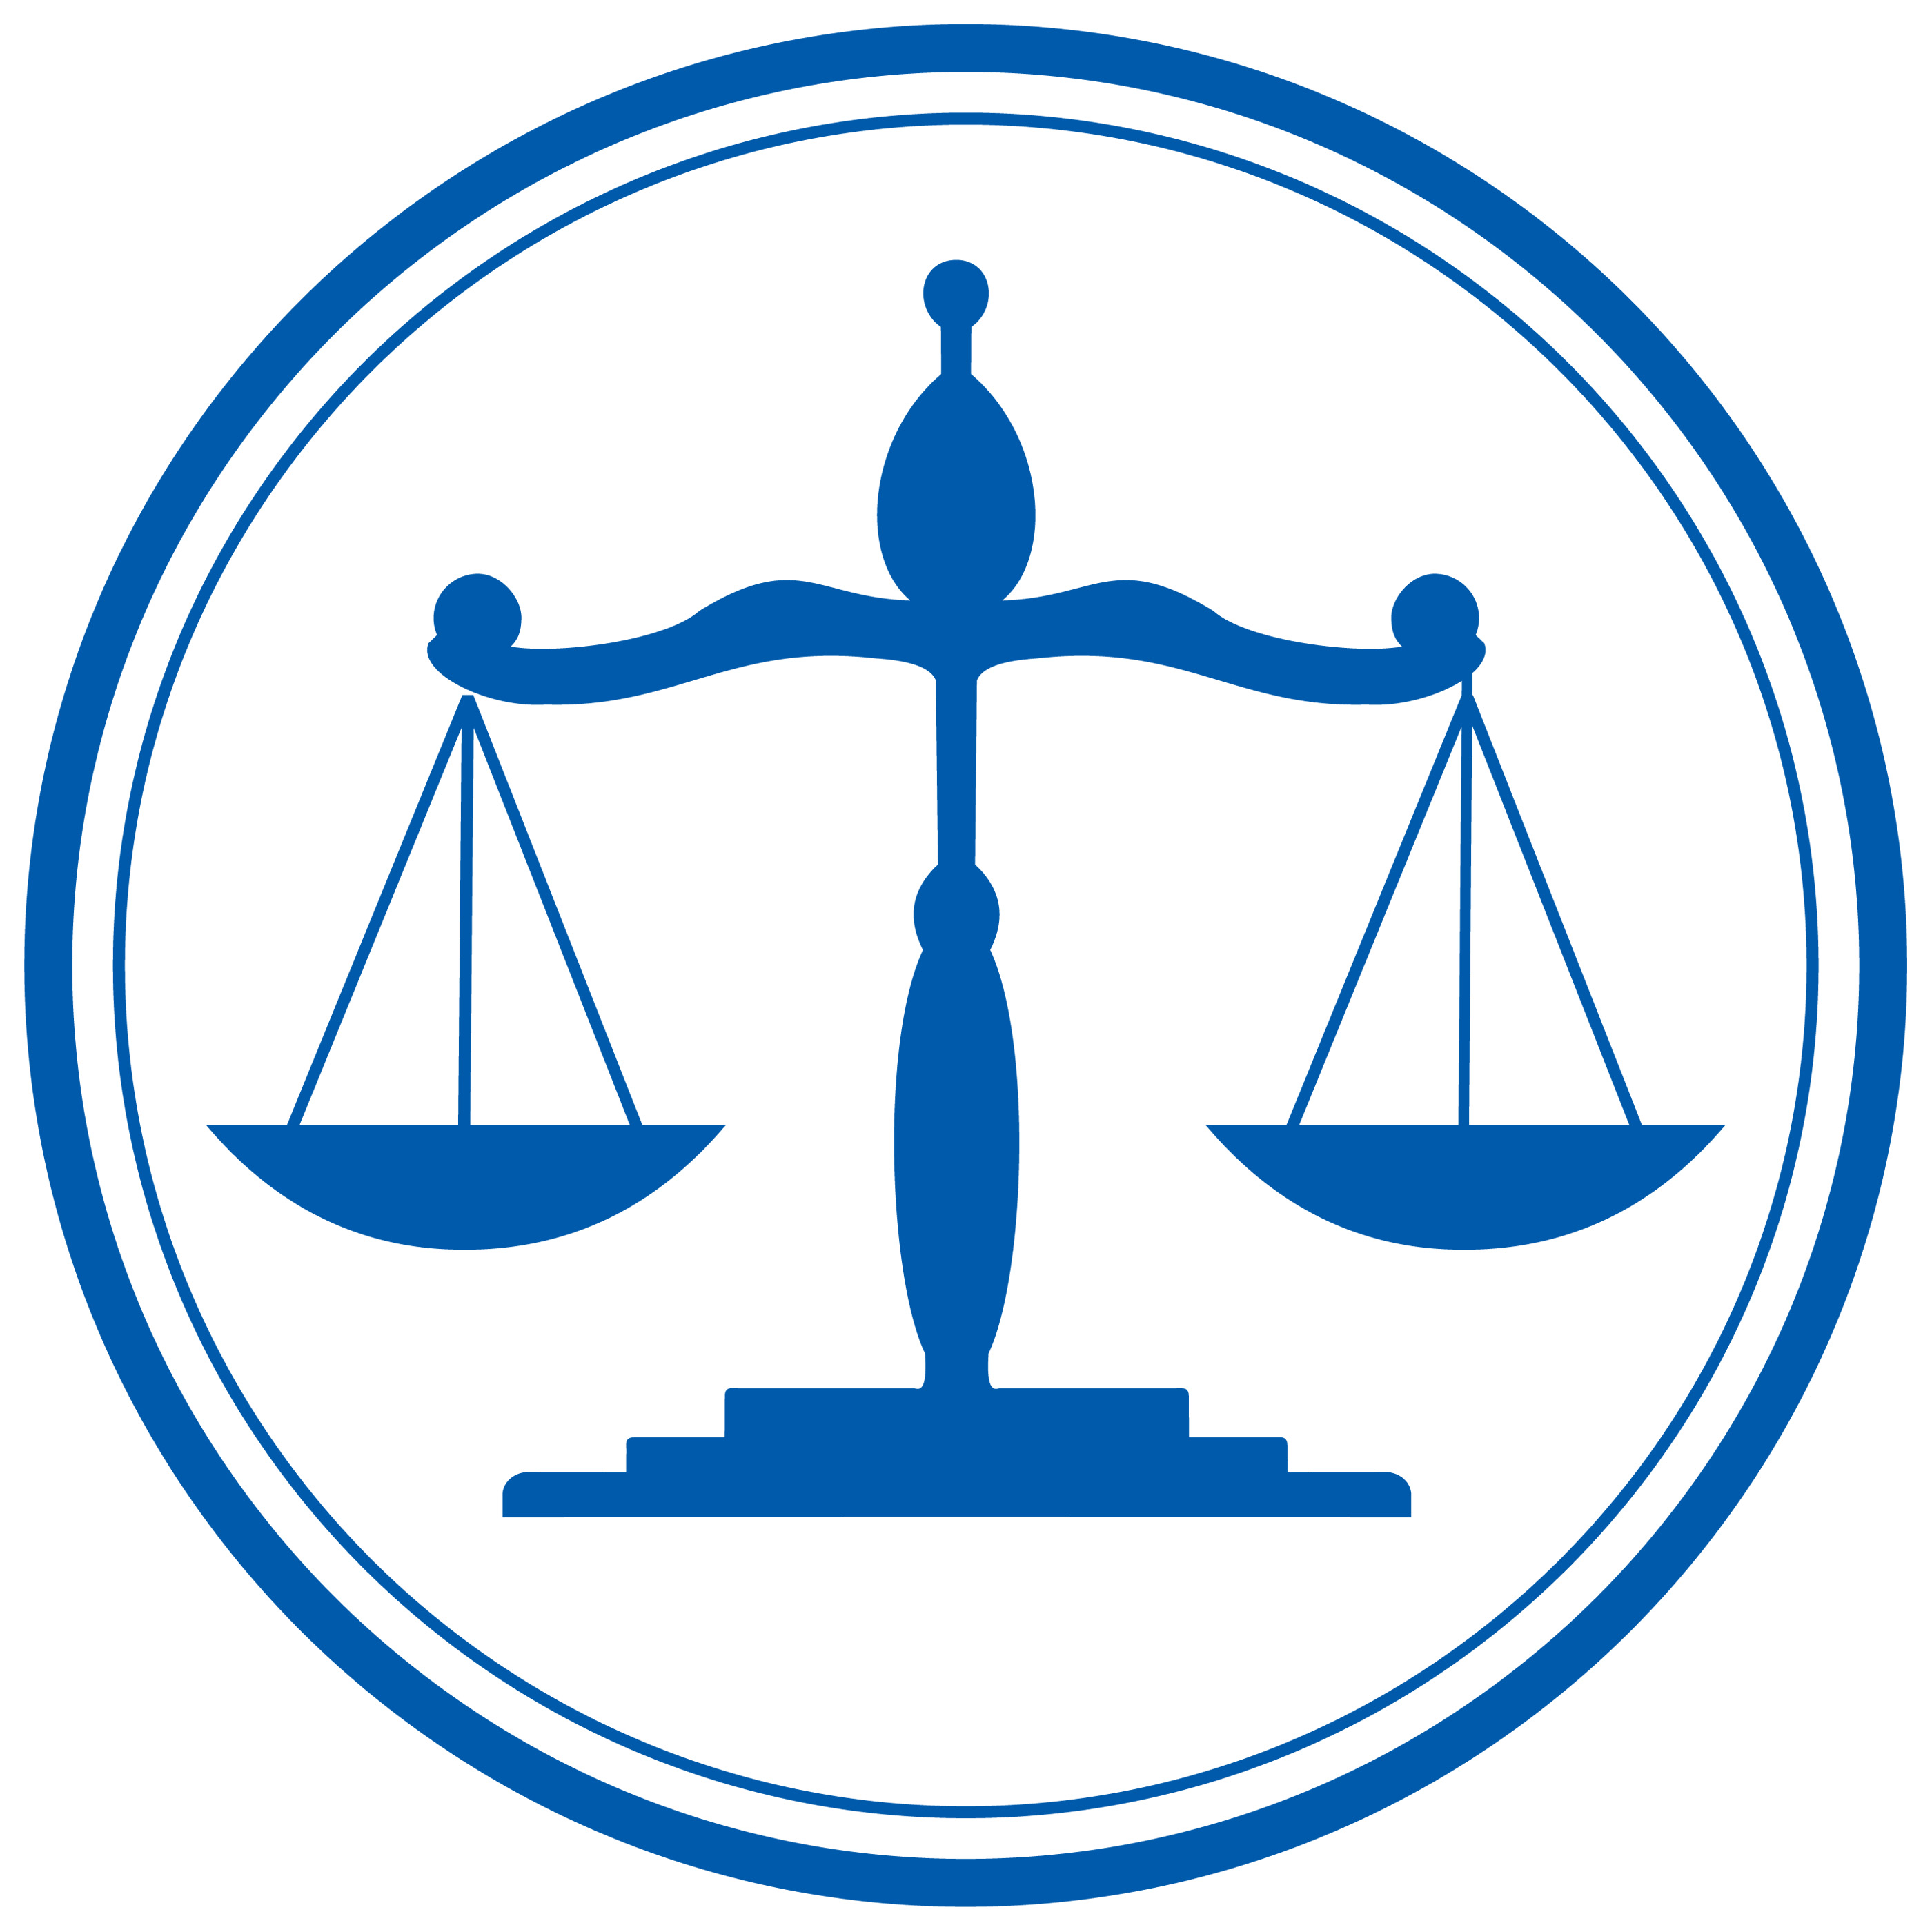 Scale Of Justice Clip Art - ClipArt Best